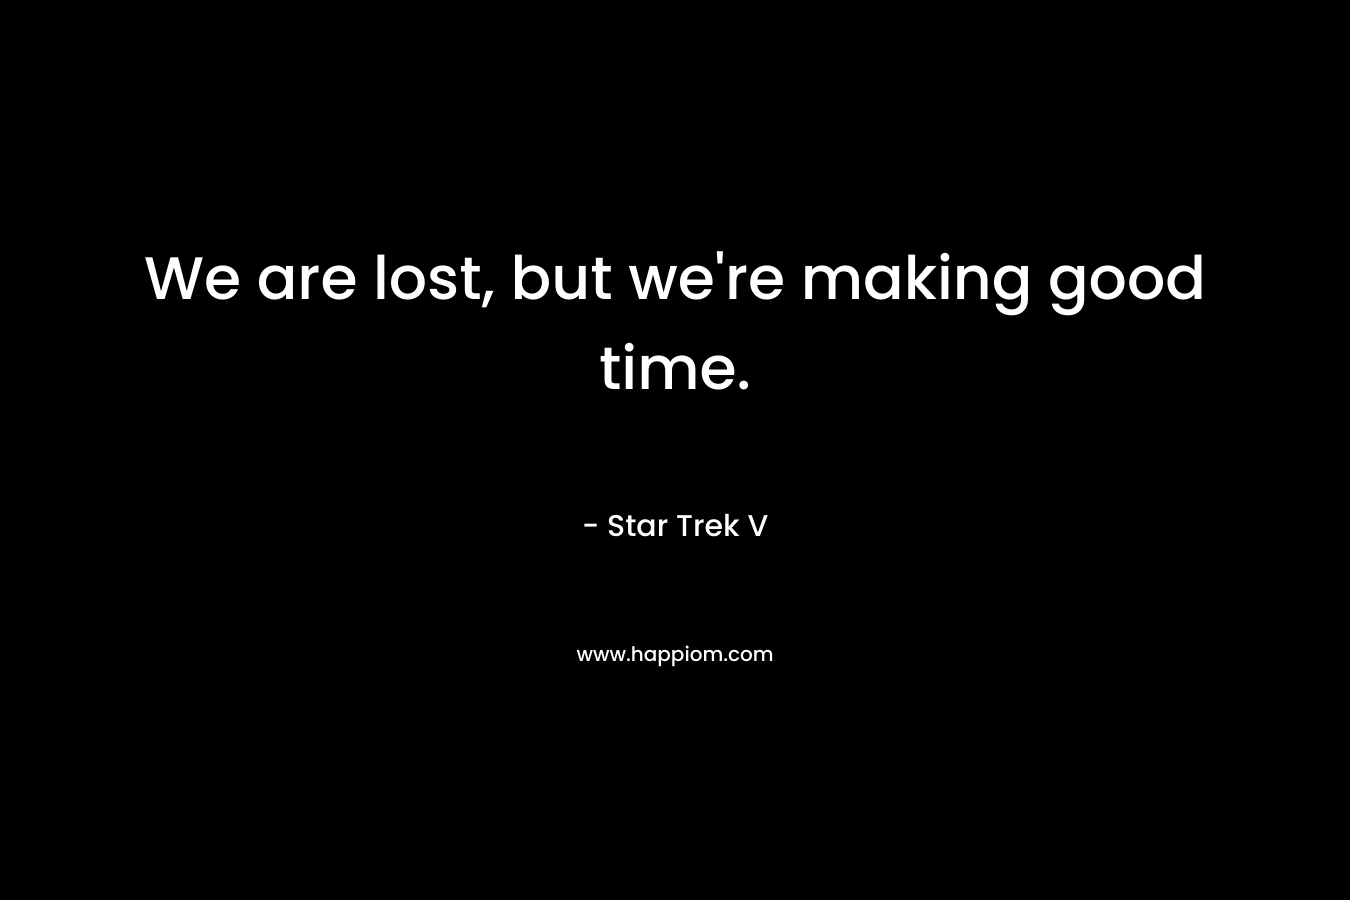 We are lost, but we’re making good time. – Star Trek V